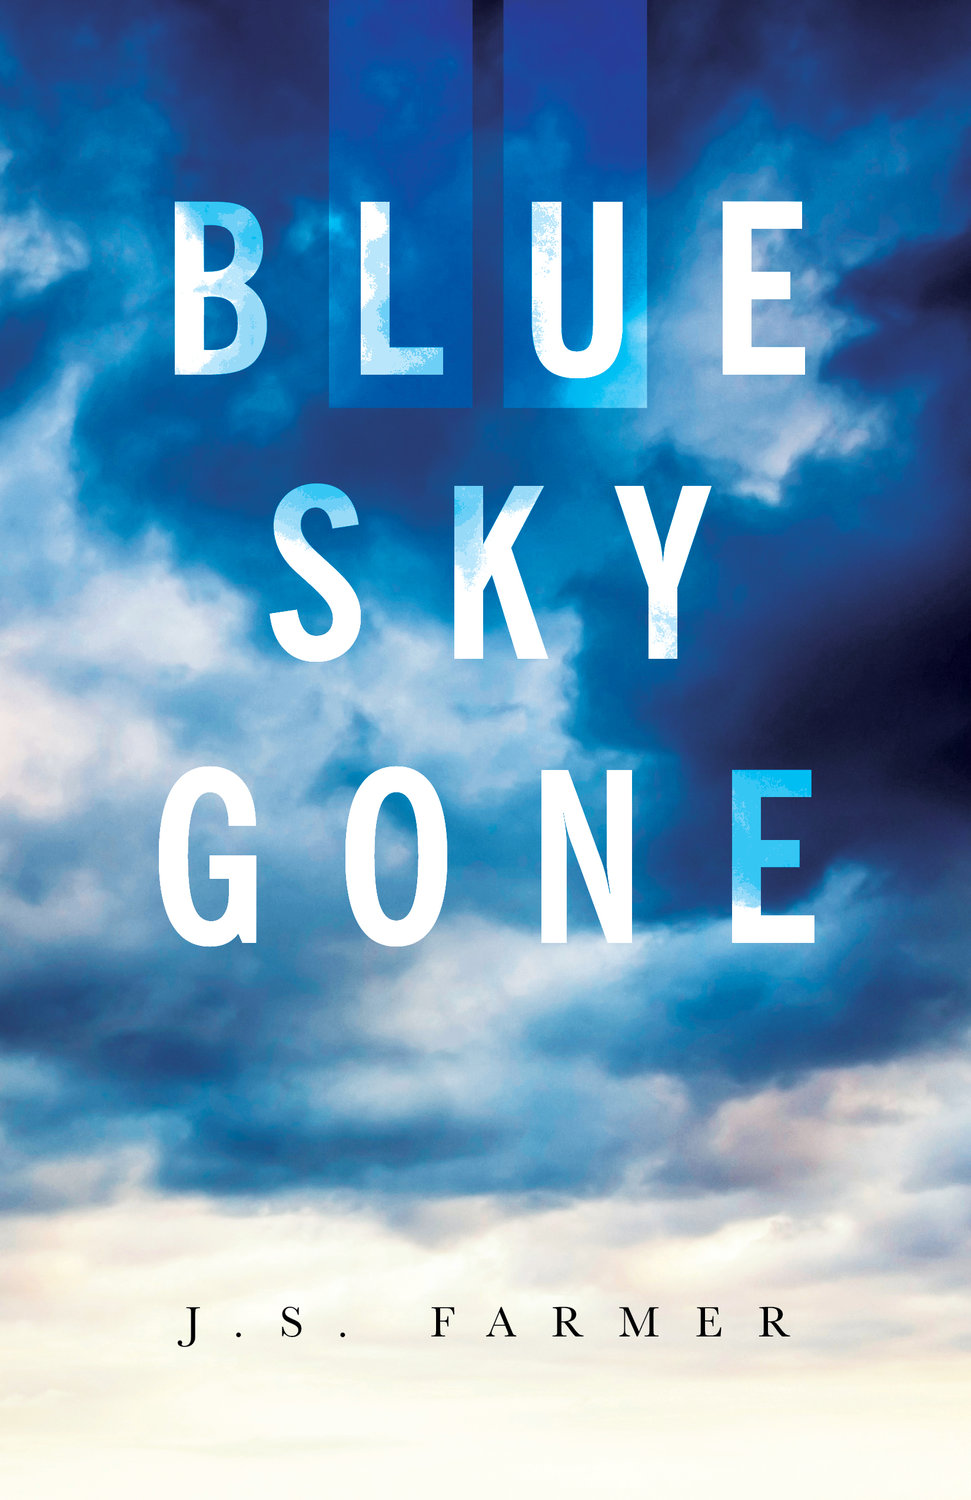 “Blue Sky Gone” depicts a fictional account of two sisters, one a police officer and the other working in the financial world, that were in New York City during 9/11.